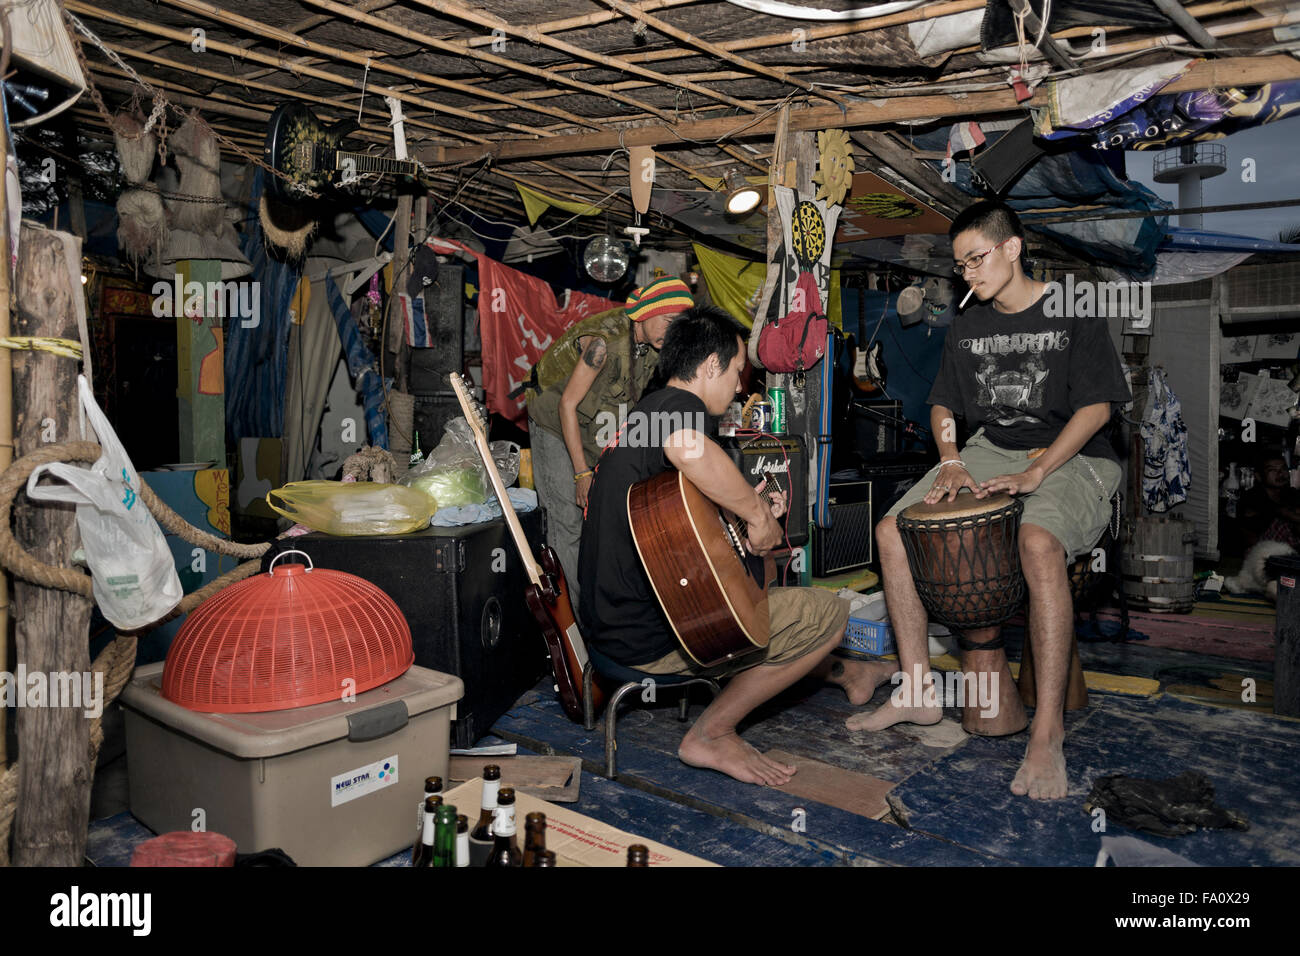 Jam session musicians in a beach side hut. Thailand S. E. Asia Stock Photo